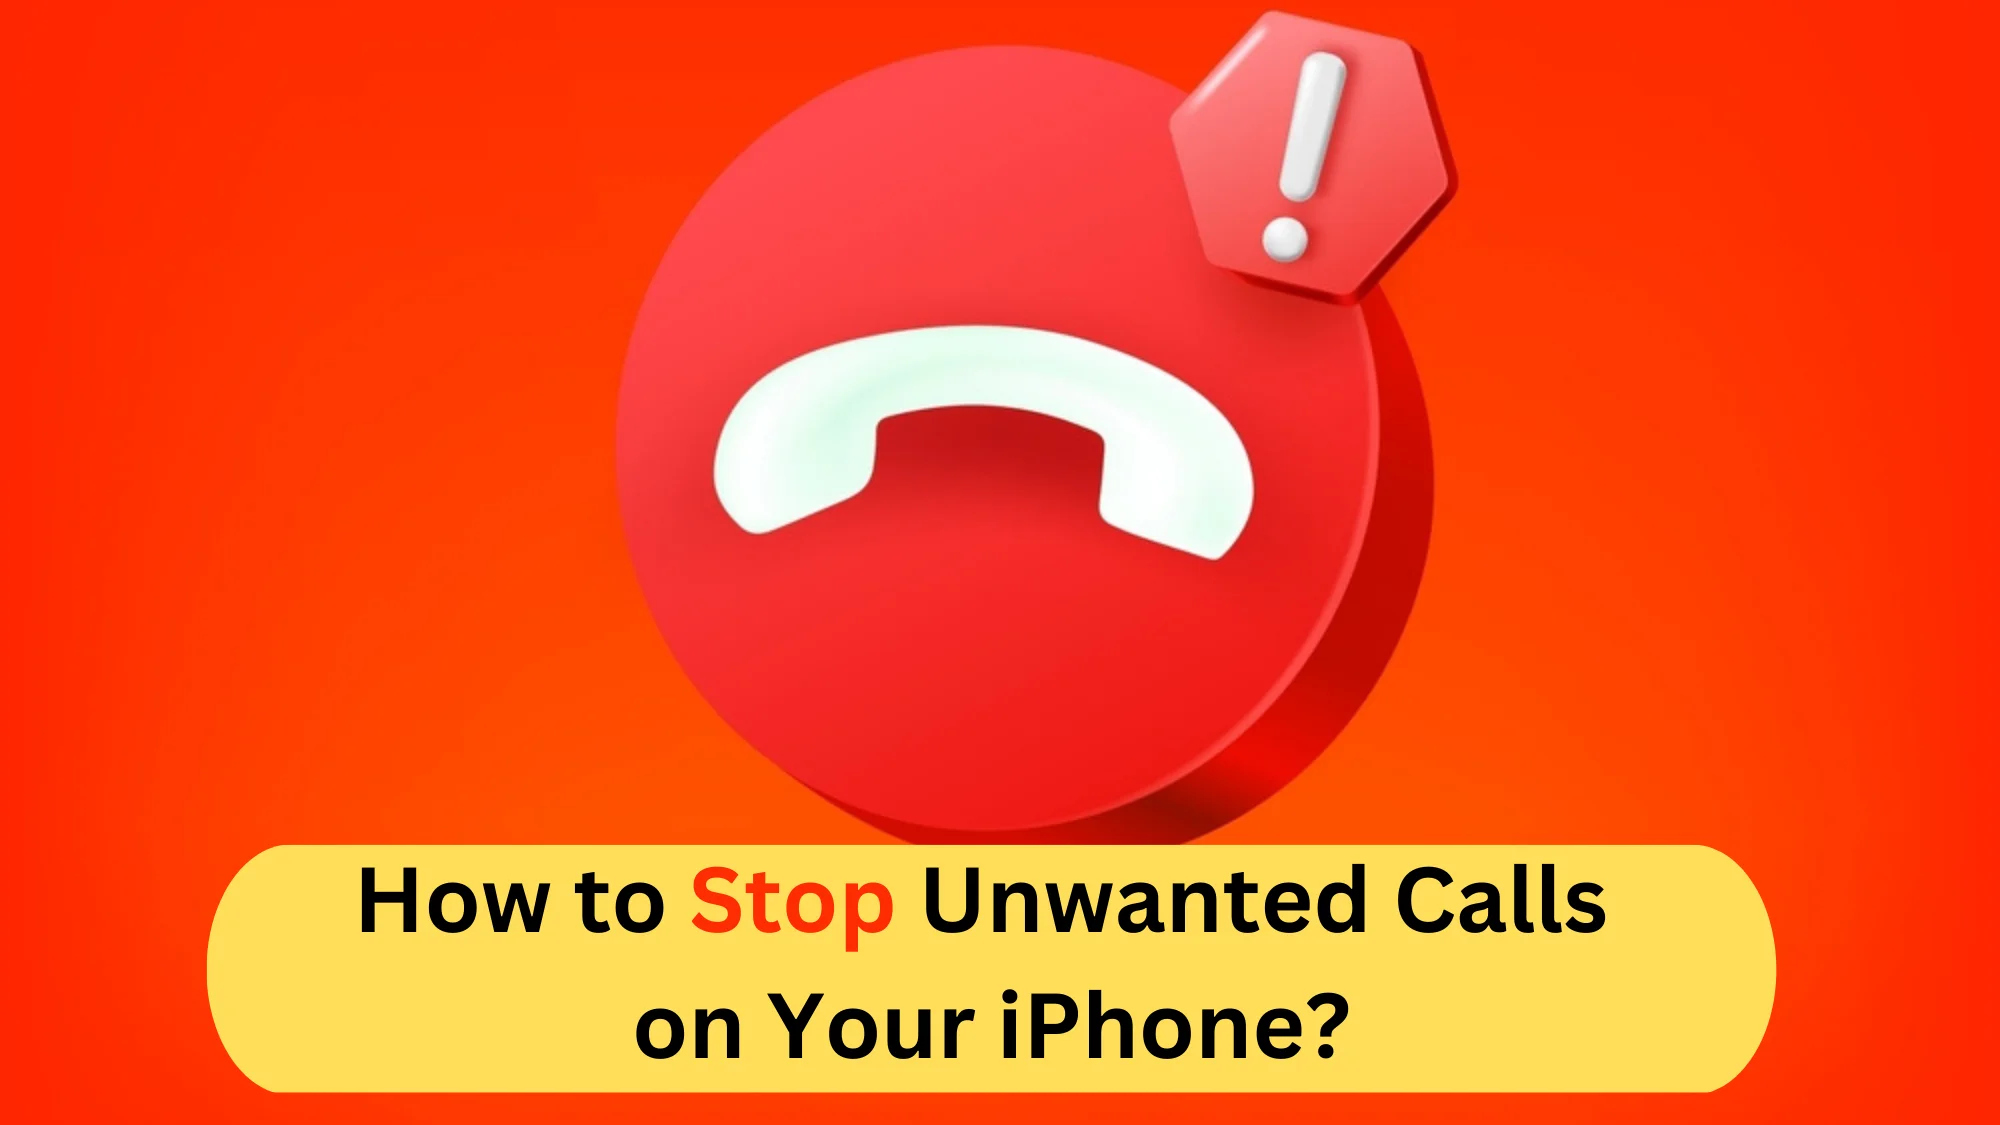 How to Stop Unwanted Calls on Your iPhone